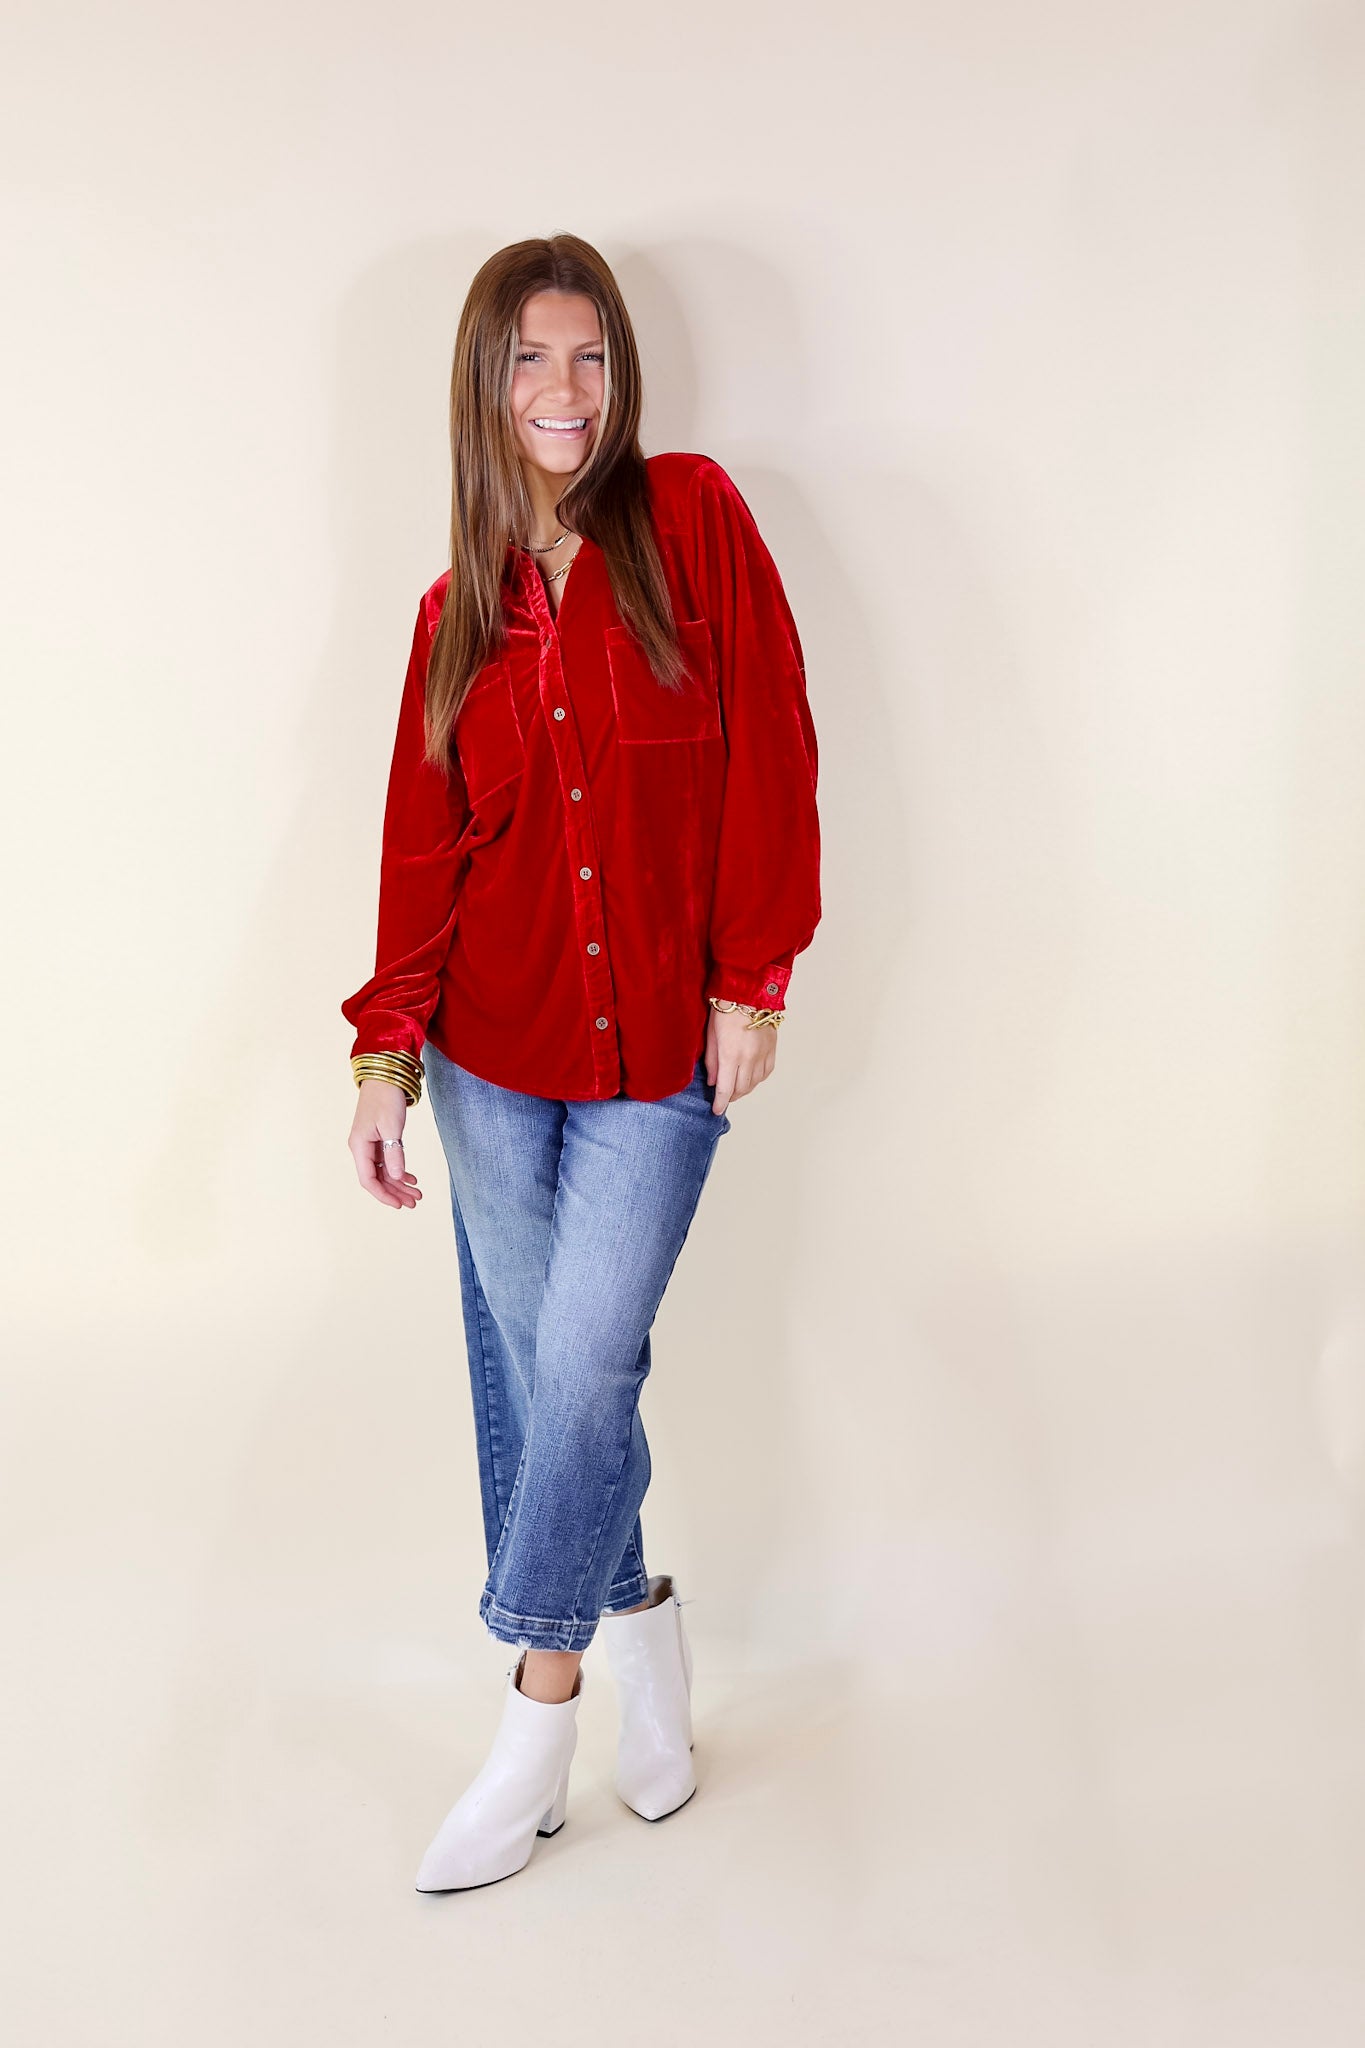 Candy Apple Evening Button Up Velvet Long Sleeve Blouse in Red - Giddy Up Glamour Boutique